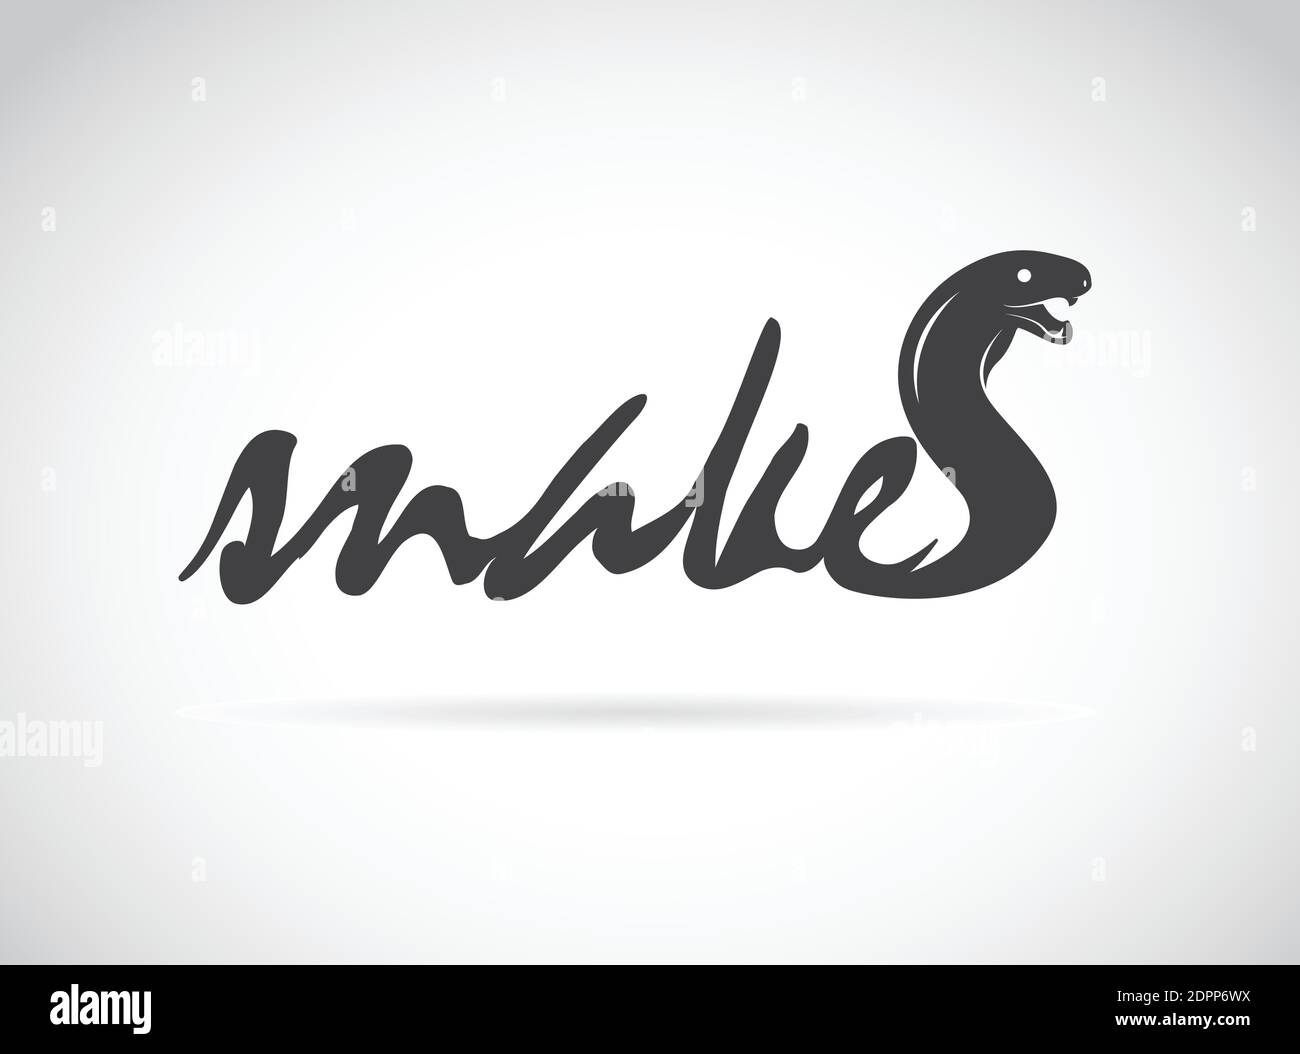 Vector design snake is text on a white background. Easy editable layered vector illustration. Wild Animals. Stock Vector